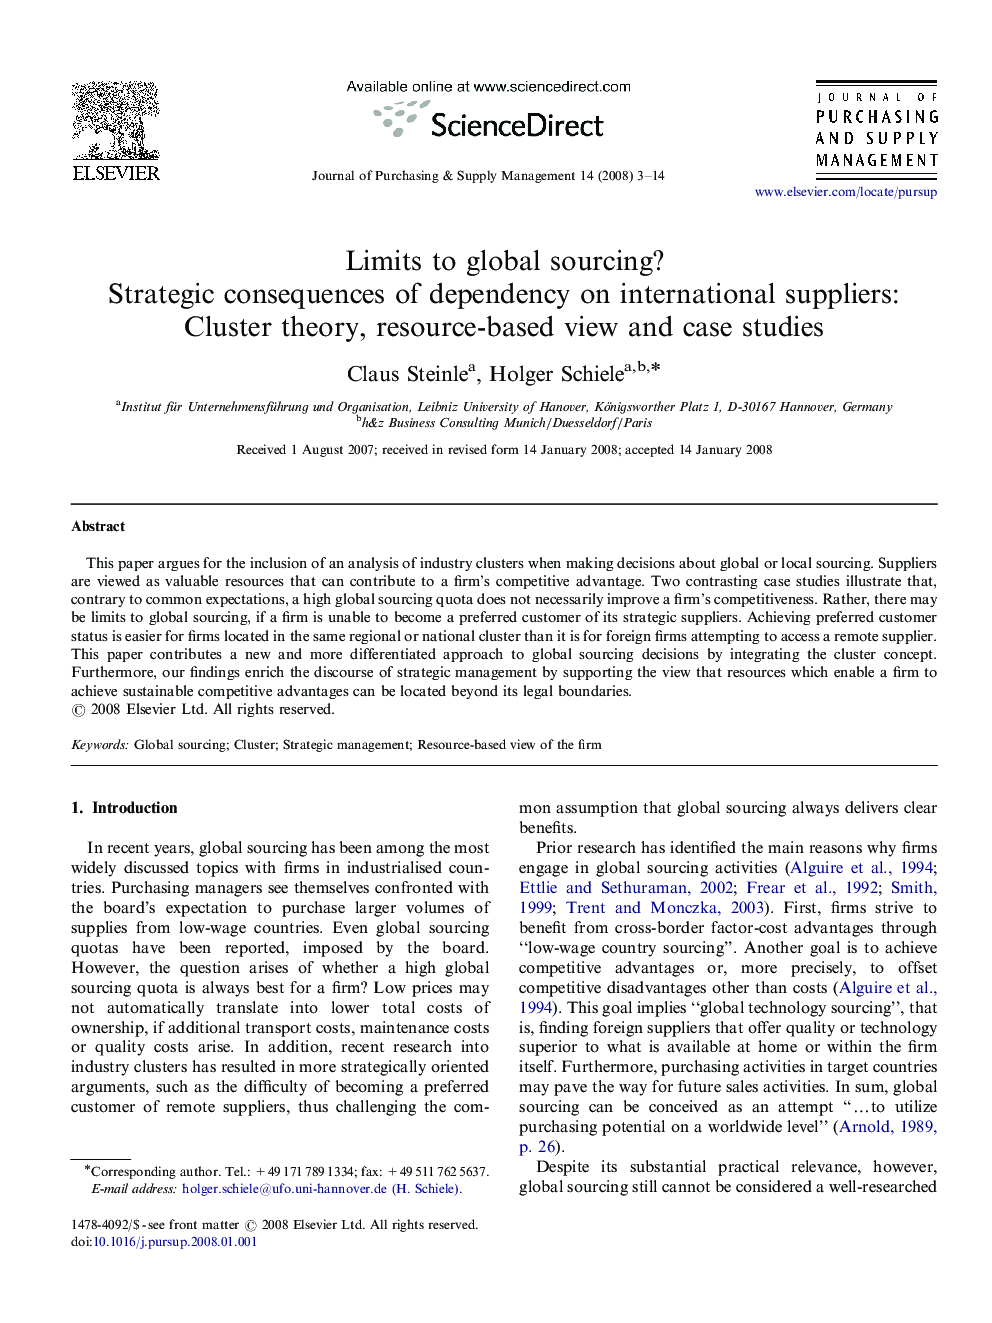 Limits to global sourcing?: Strategic consequences of dependency on international suppliers: Cluster theory, resource-based view and case studies